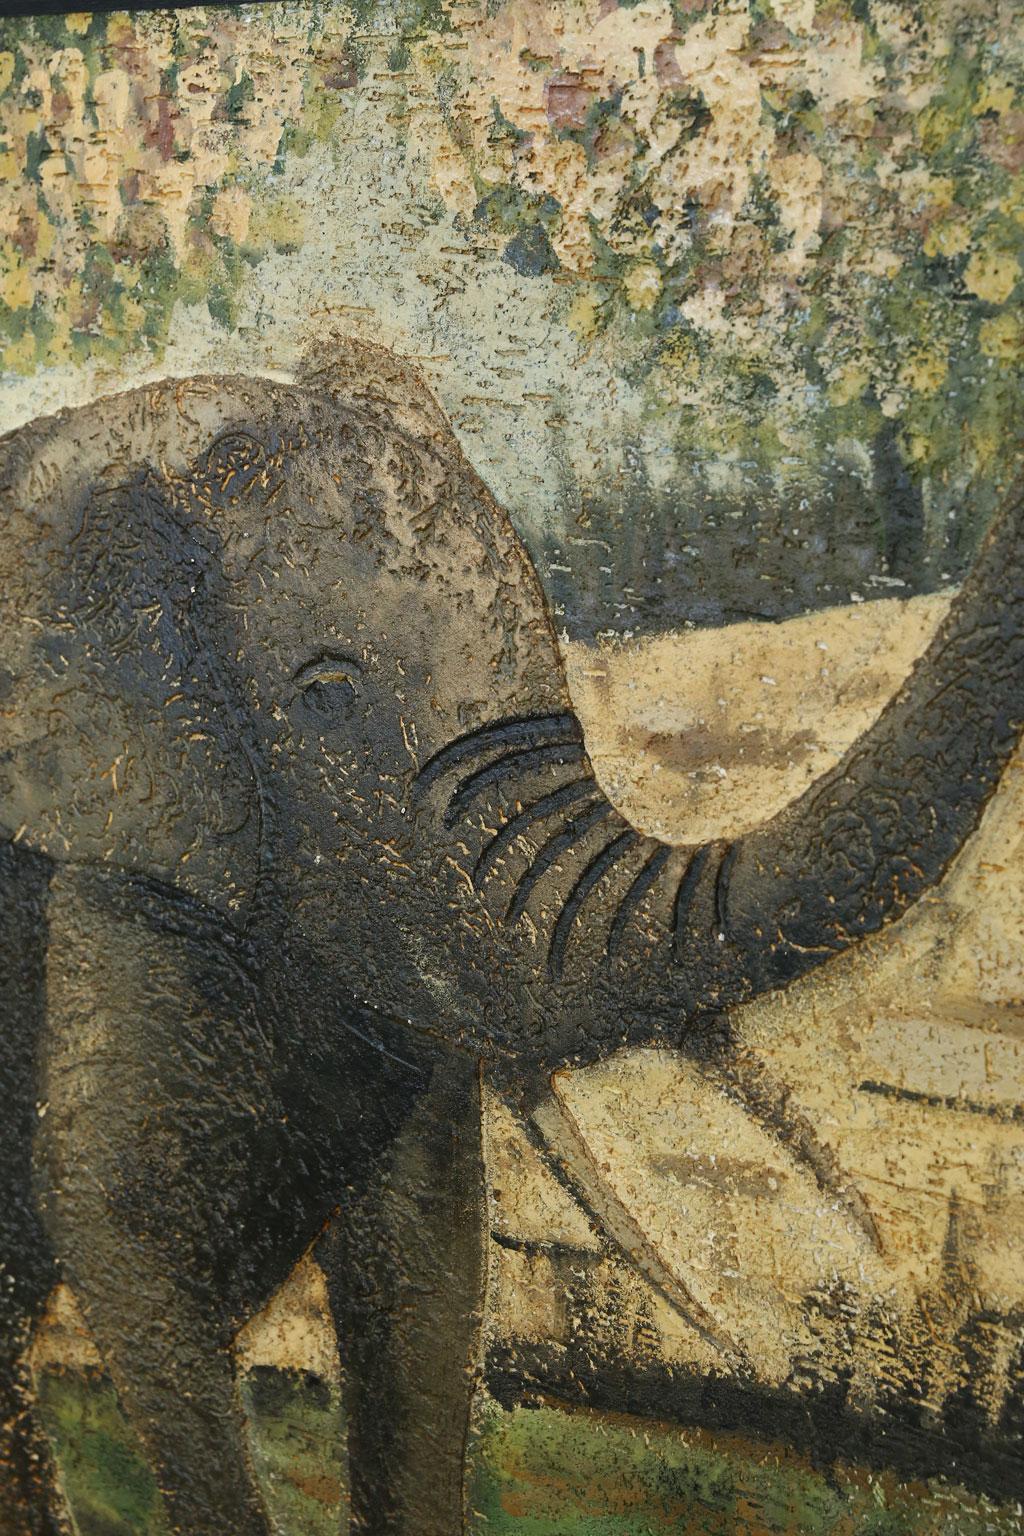 This quirky hand painted elephant is painted on board with some bas-relief like texture. It is highly decorative and arresting. Newly framed in the USA. Could be used in any room of a house or office, circa 1970s. Three dimensional effect.